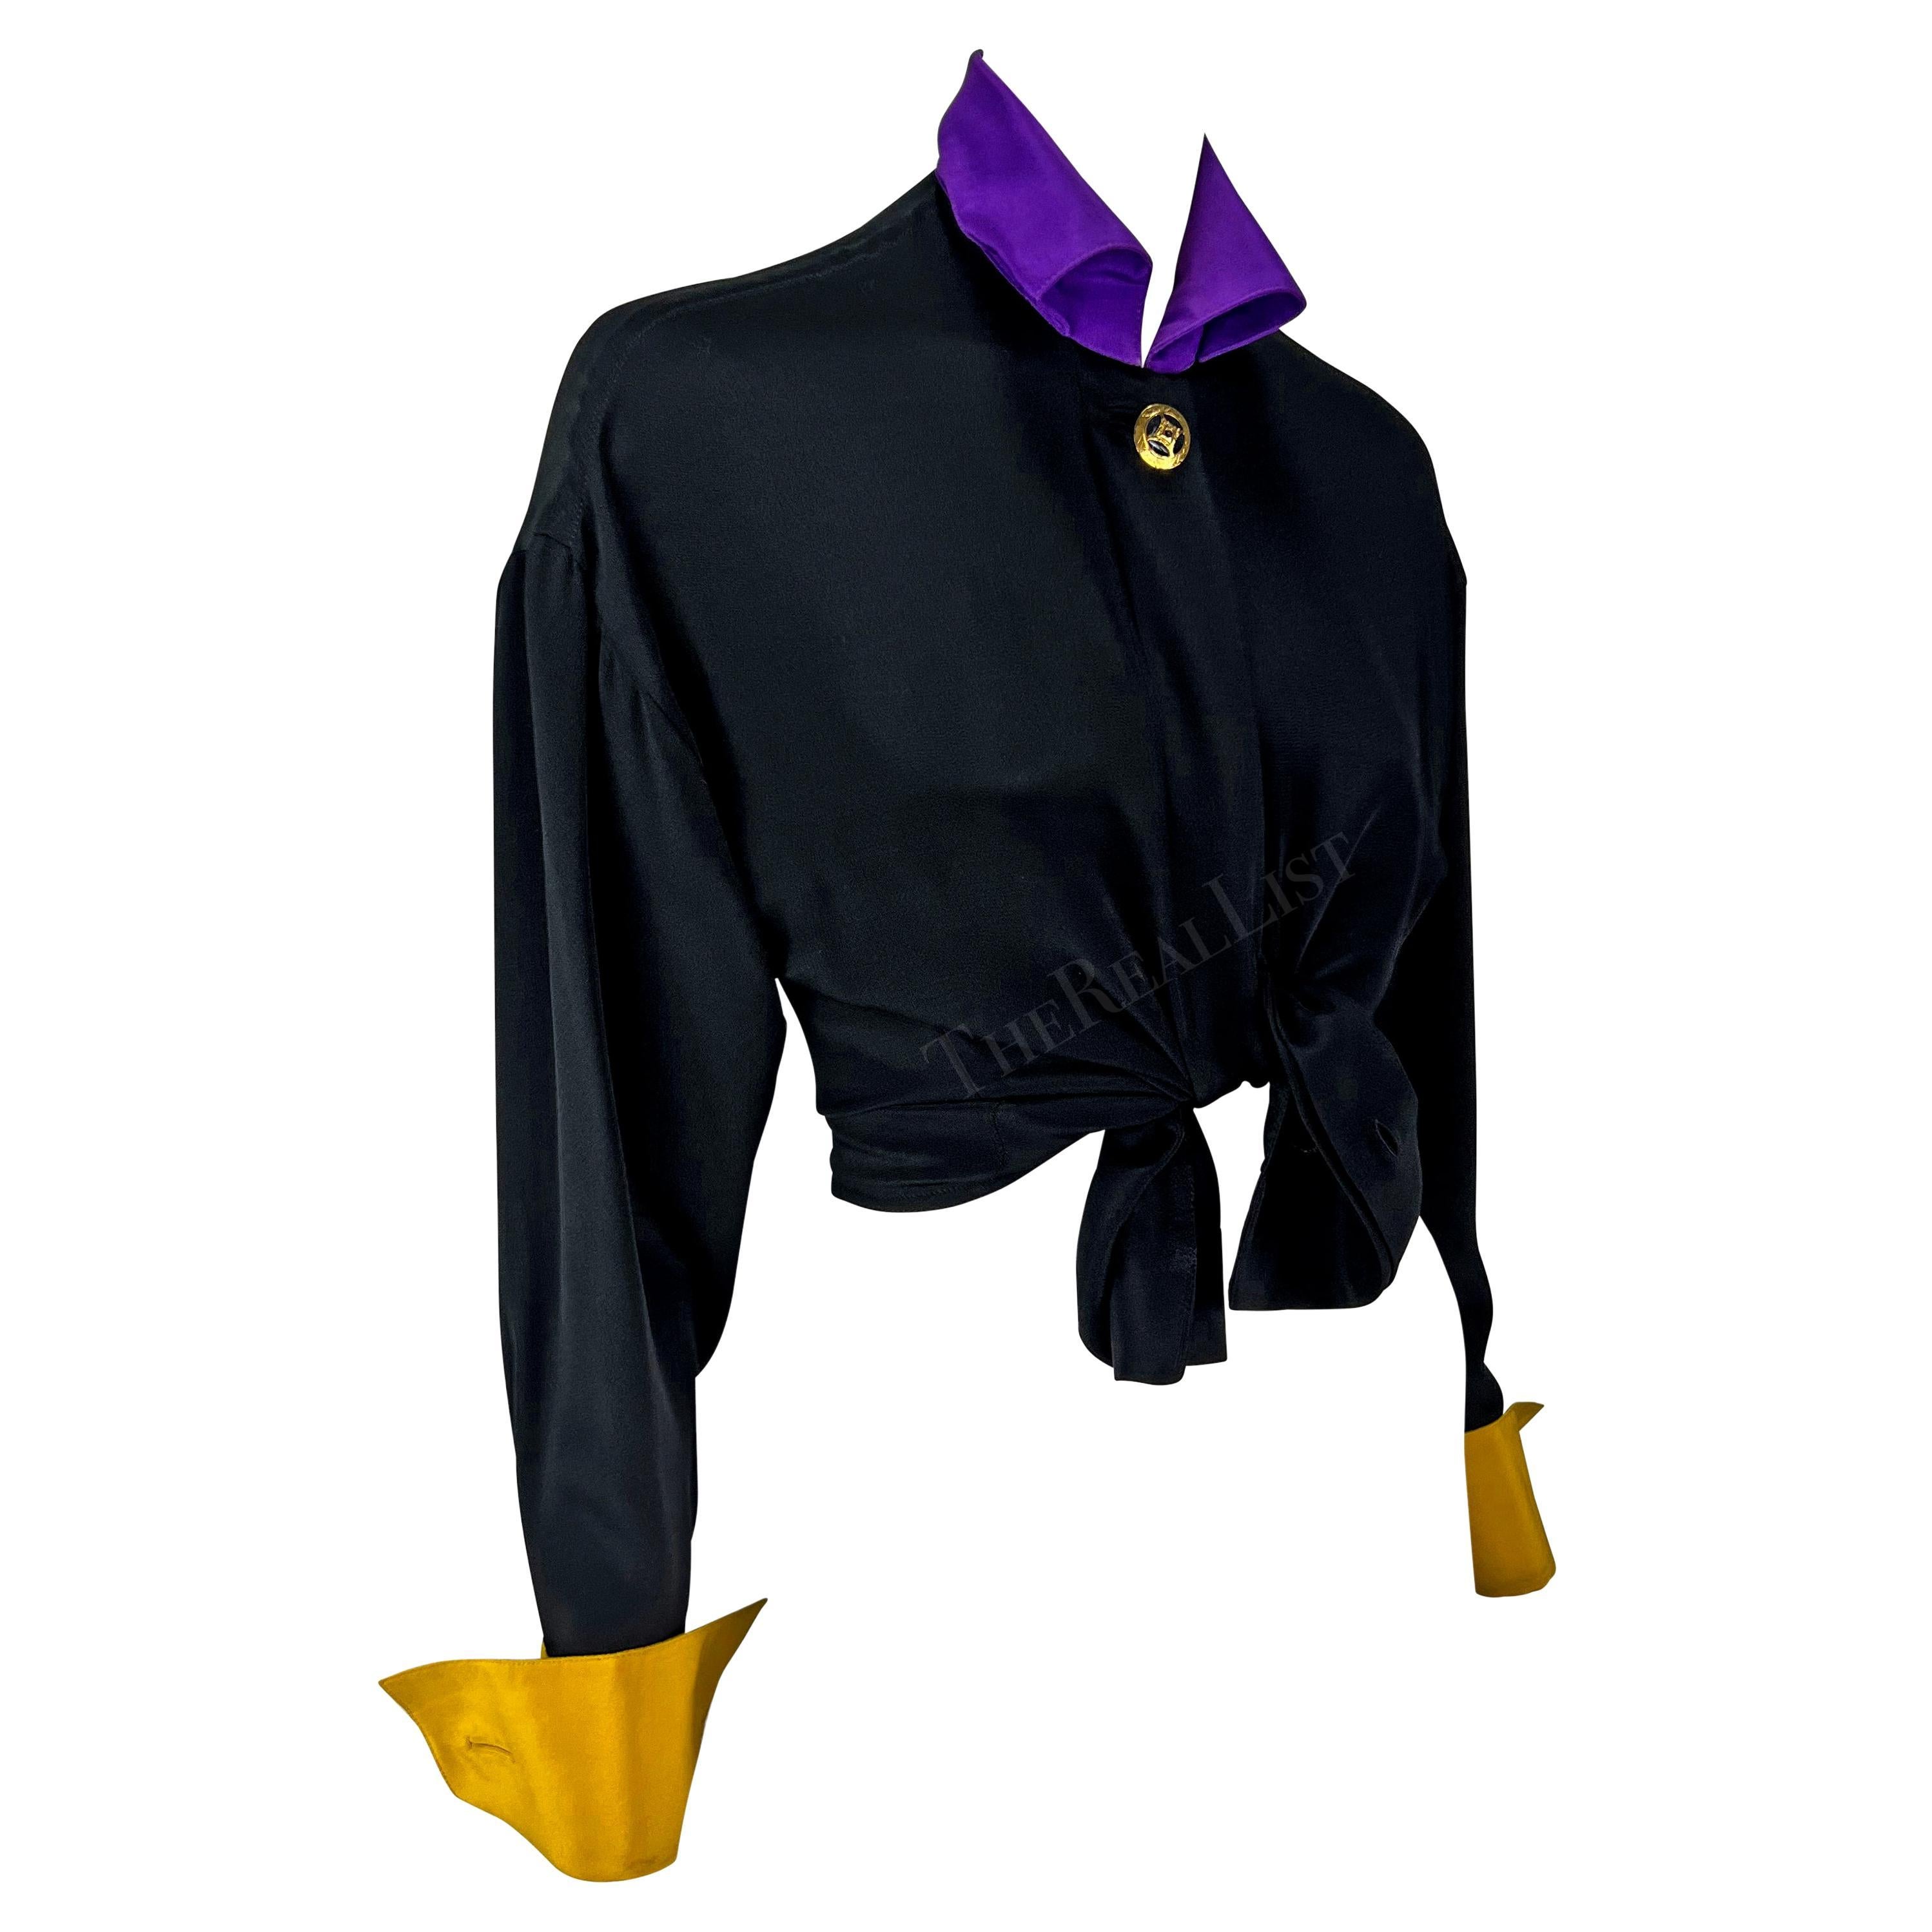 F/W 1991 Gianni Versace Black Silk Color Block Runway Button Down Top For Sale 4